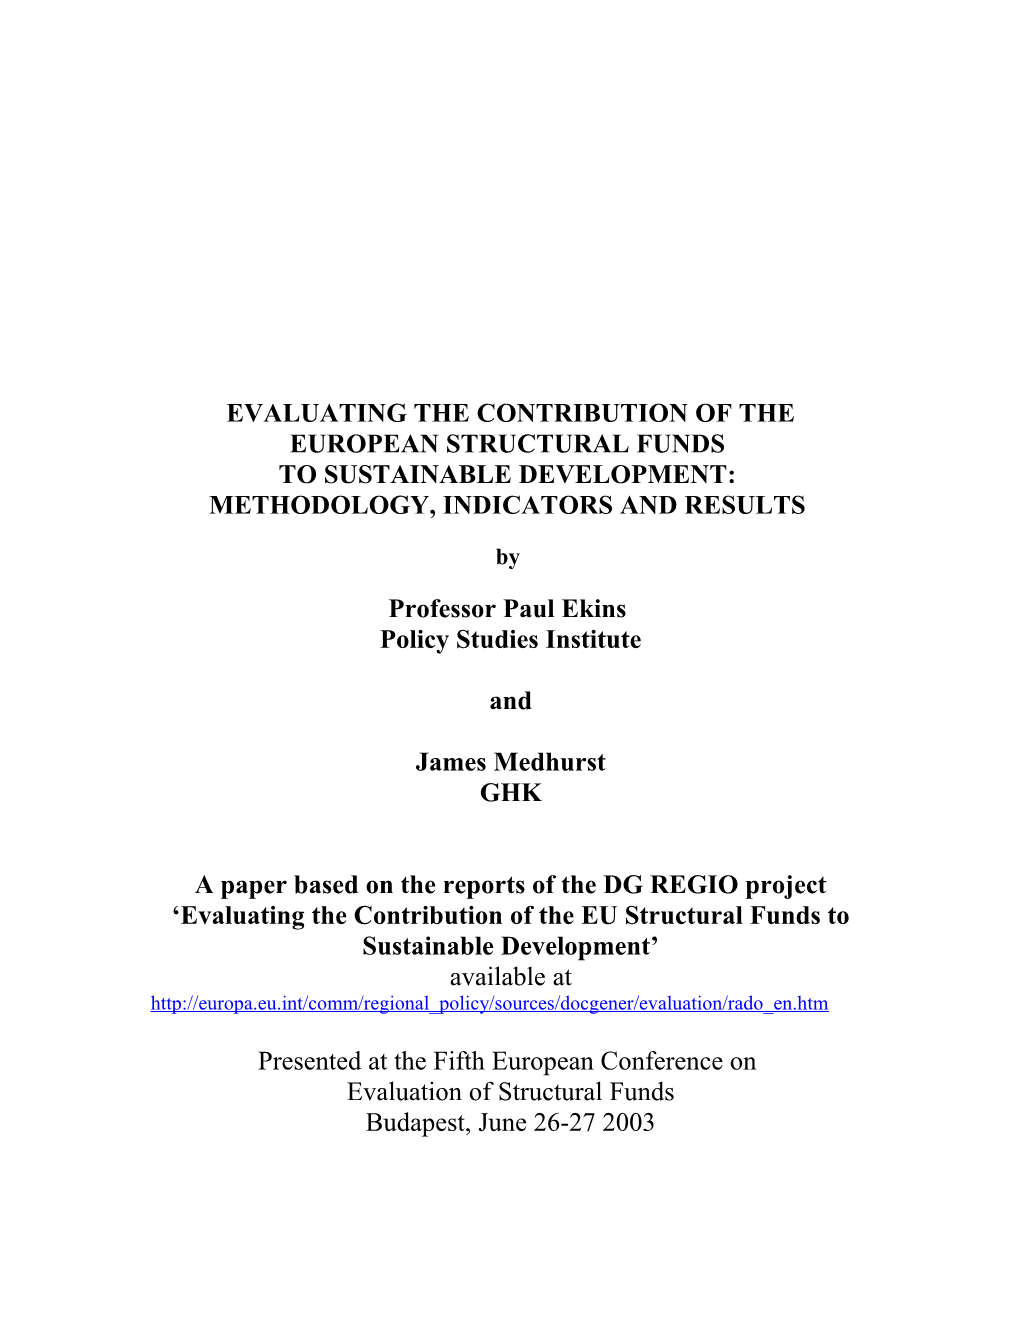 Evaluation of the Contribution of the Eu Structural Funds to Sustainable Development